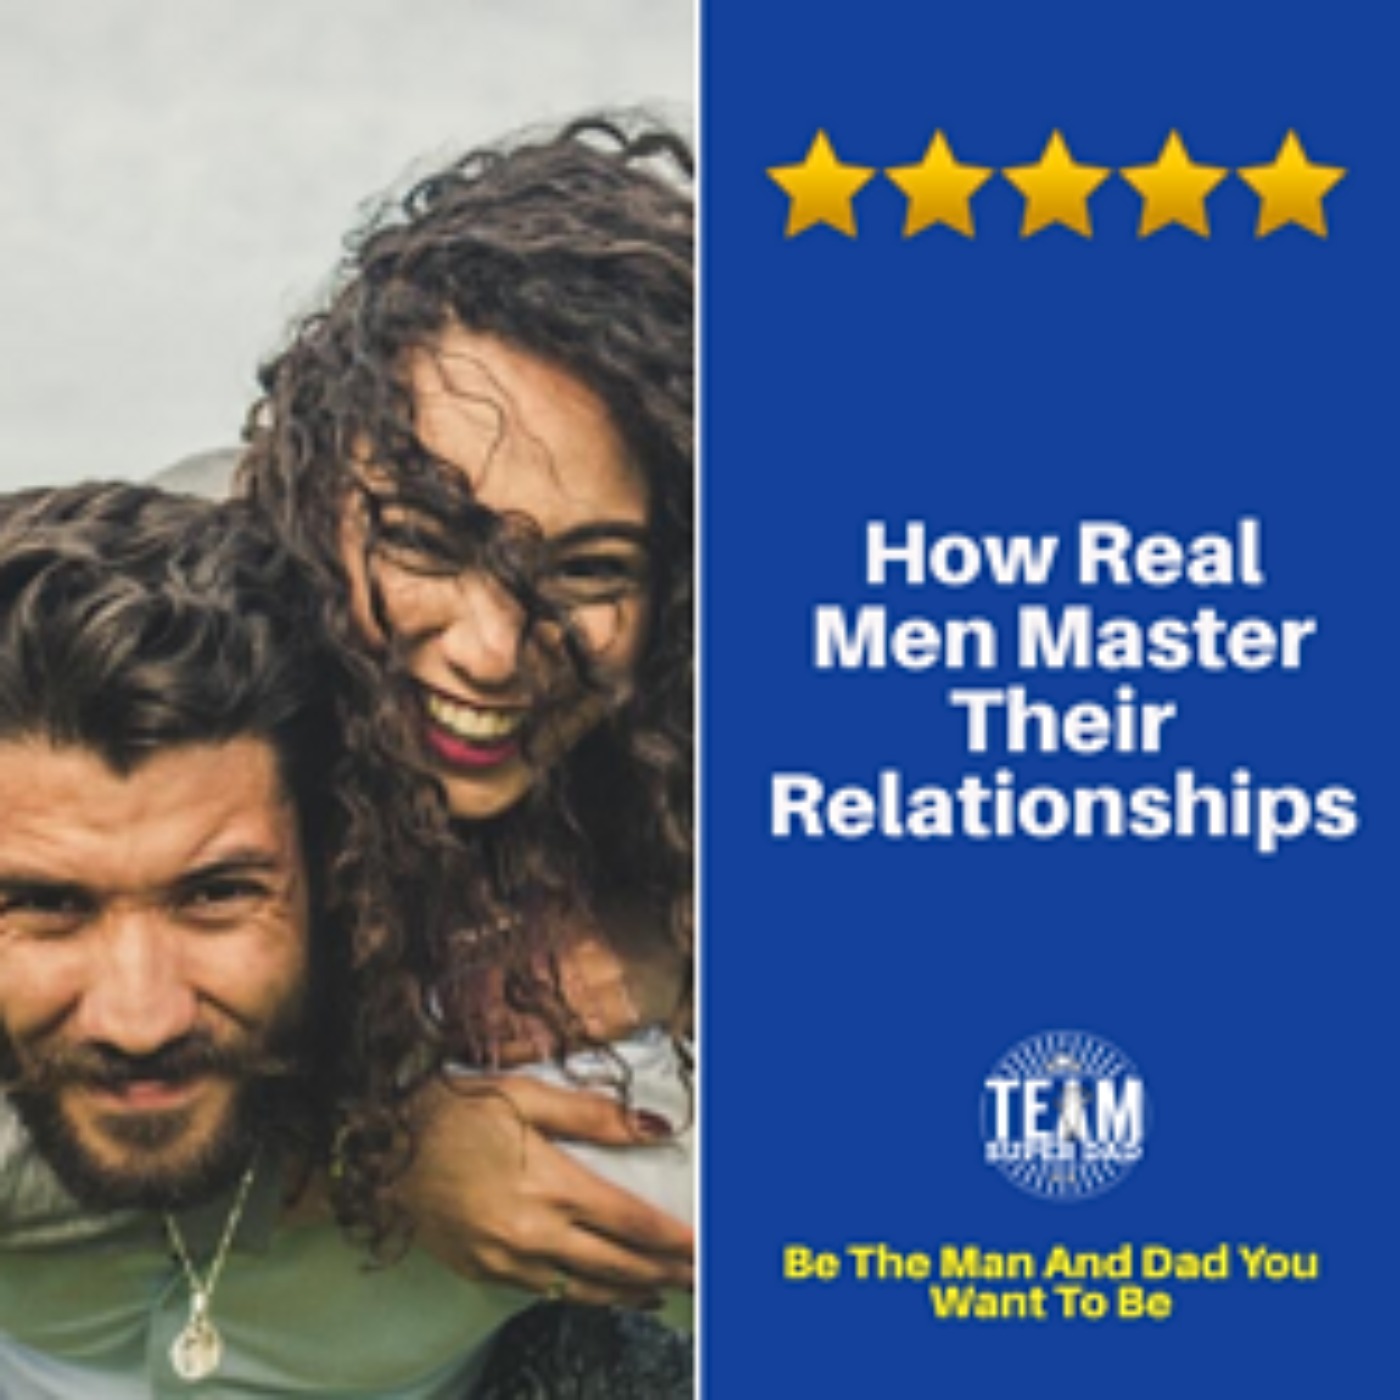 How Real Men Master Their Relationships